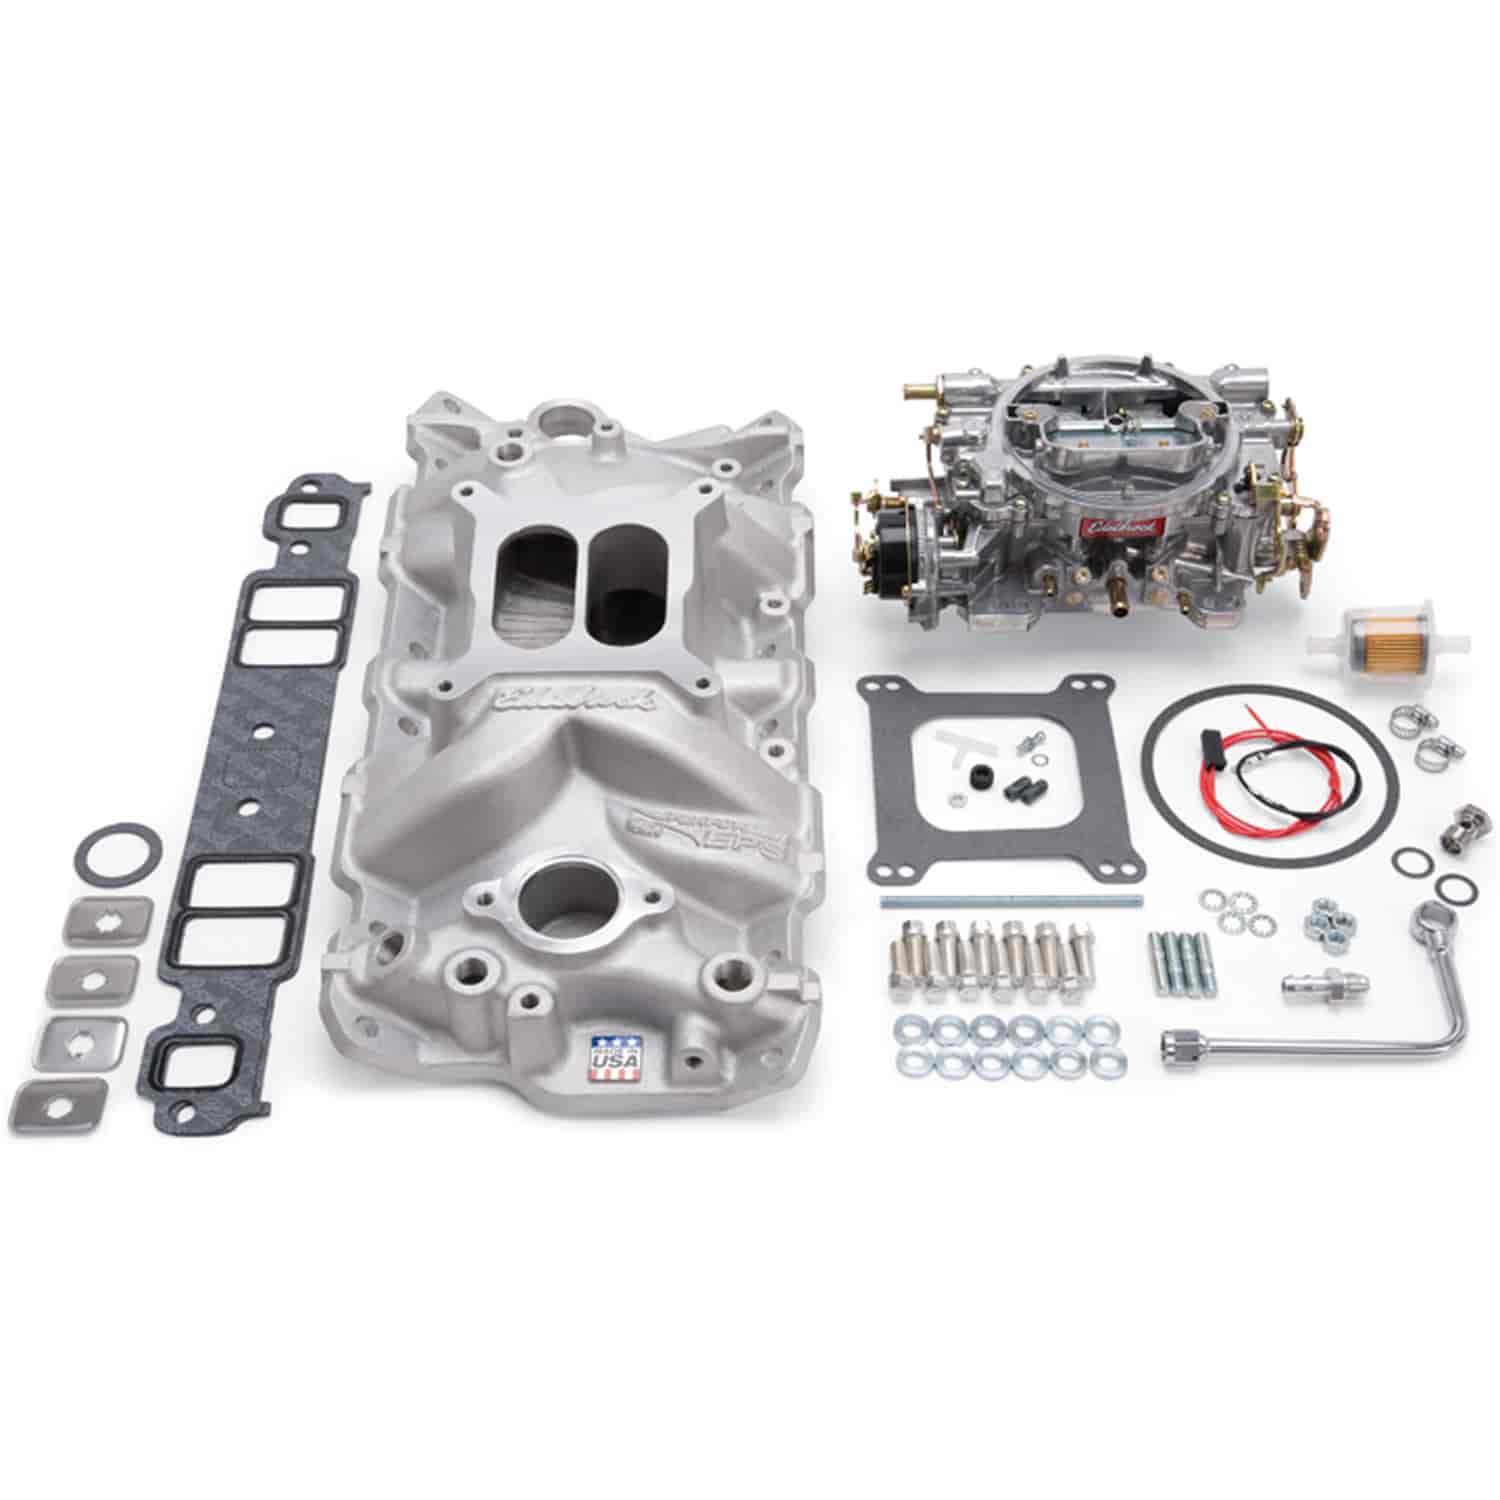 Single-Quad Performer Manifold and Carburetor Kit for Small Block Chevy 1955-1986